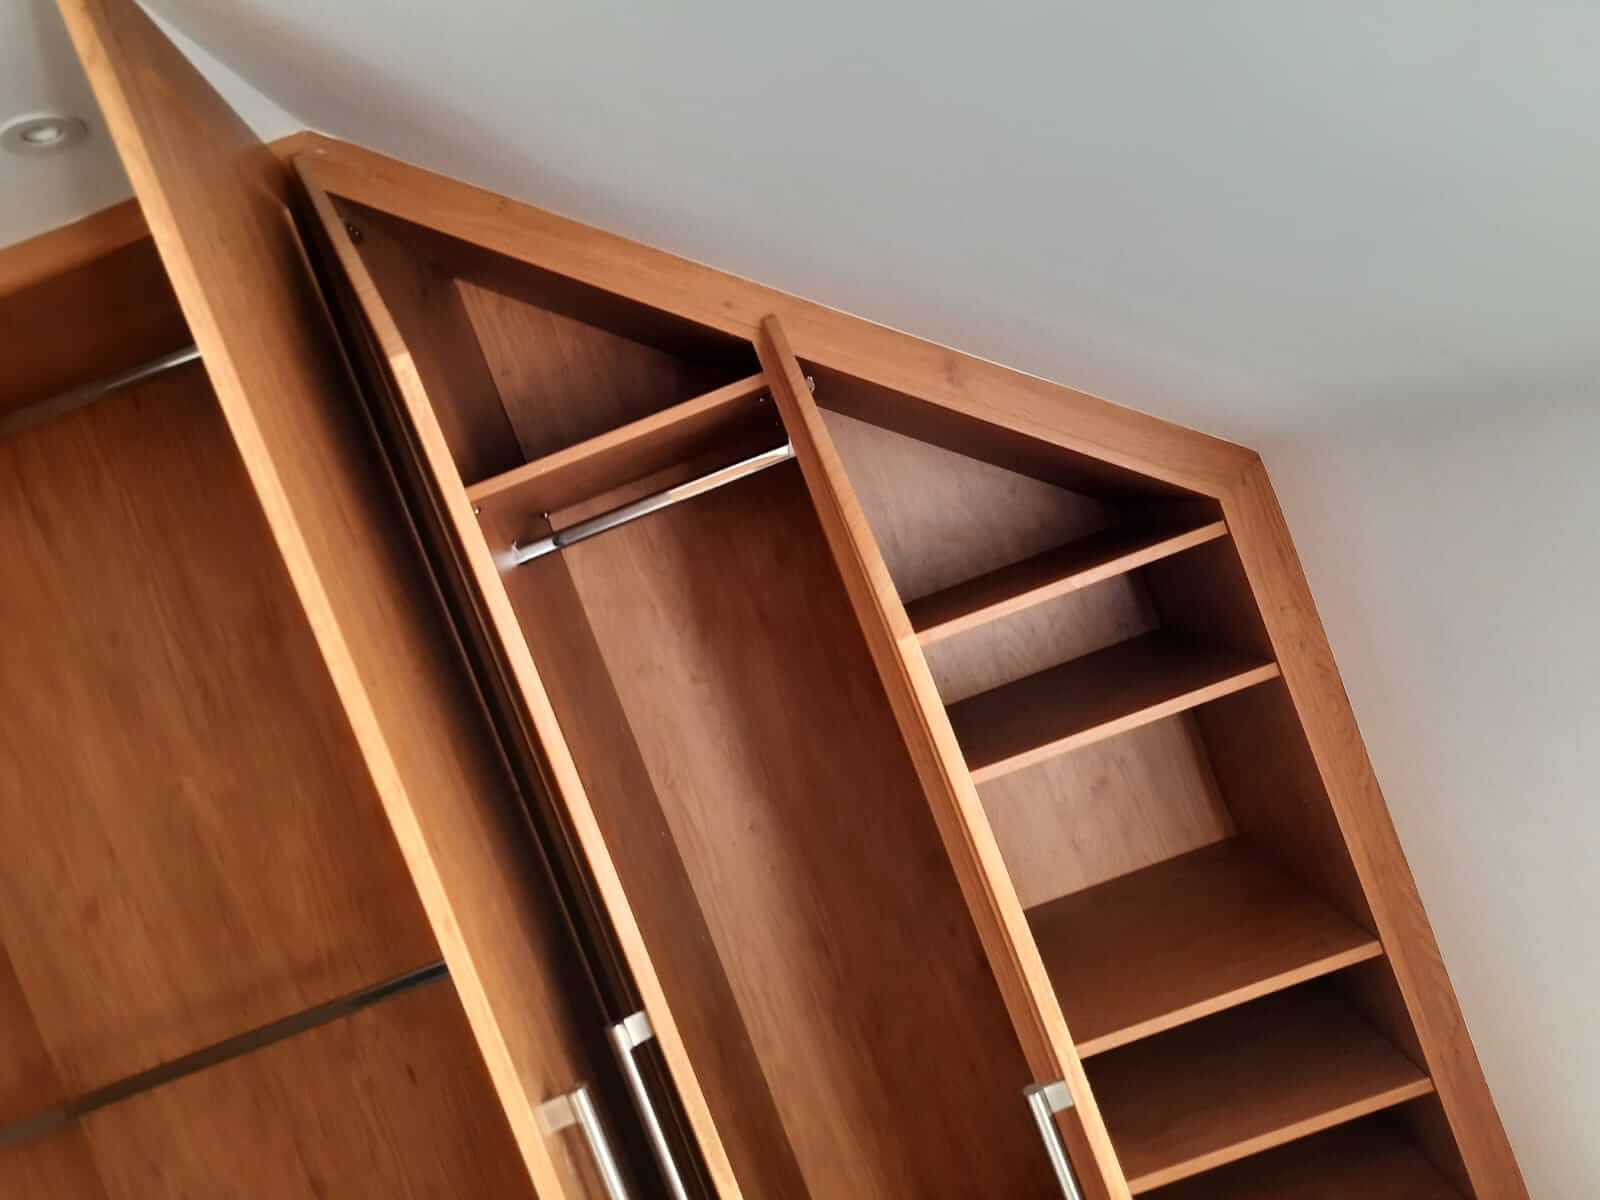 Bedroom Wardrobe showing Detail of Angled Ceiling Fit